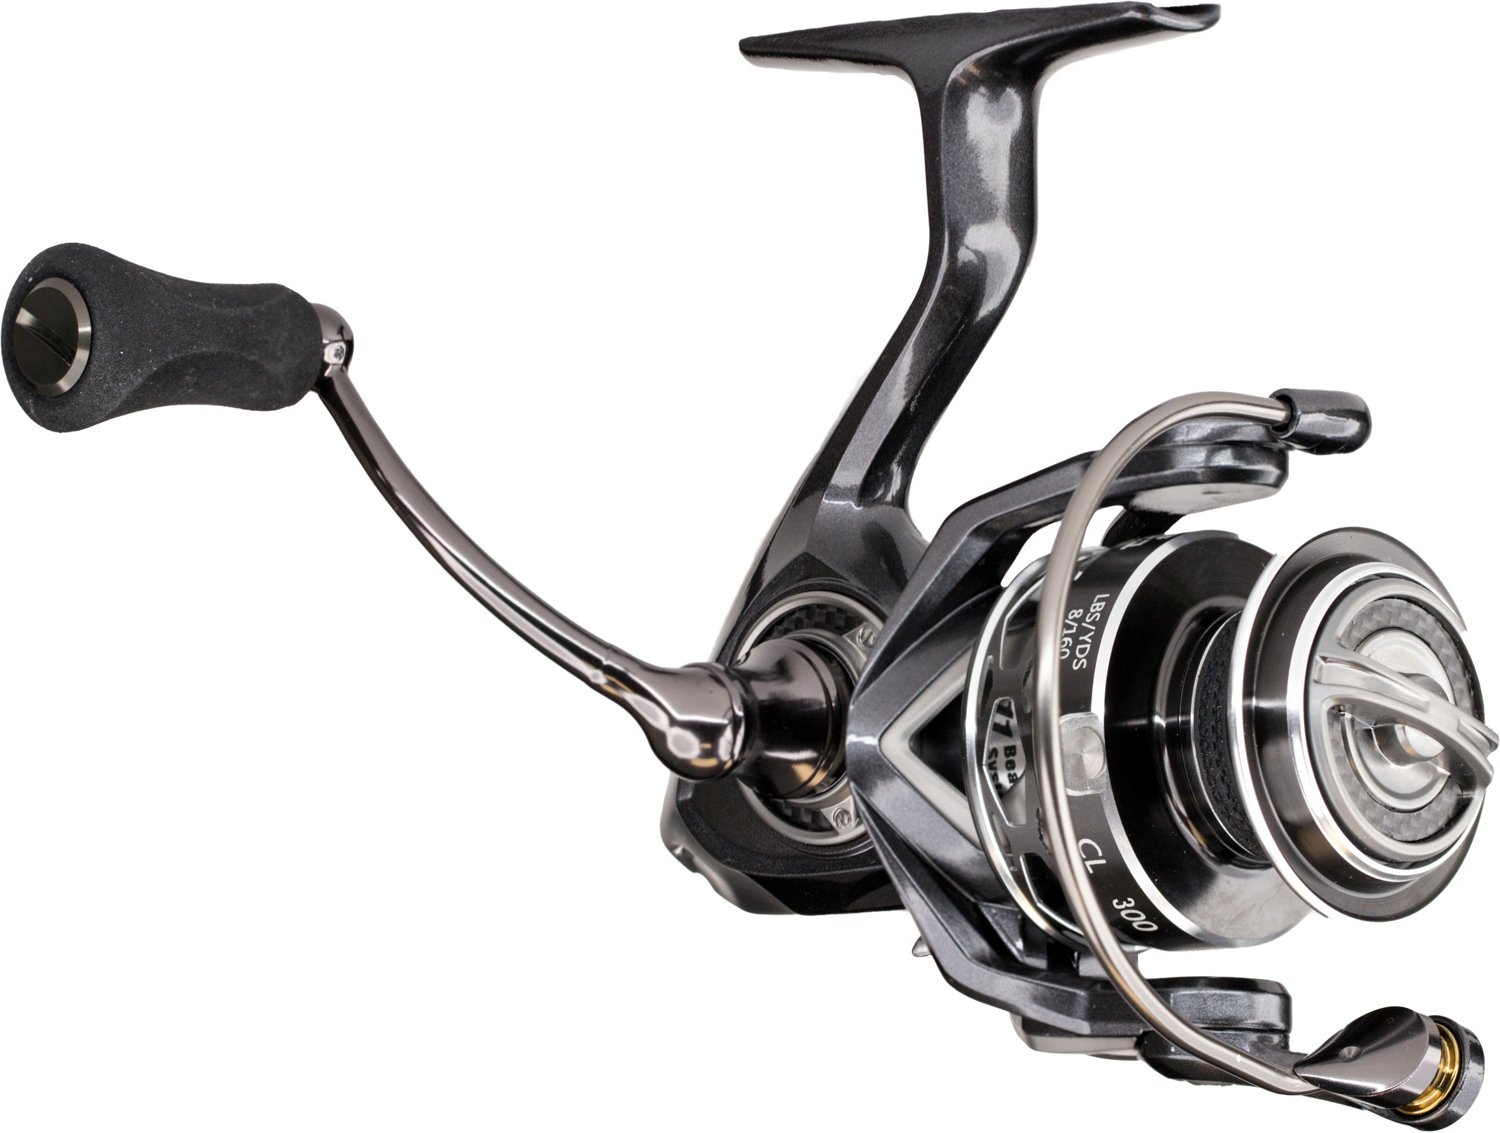 Academy Sports + Outdoors Lew's Laser Lite Speed Spin Spinning Reel